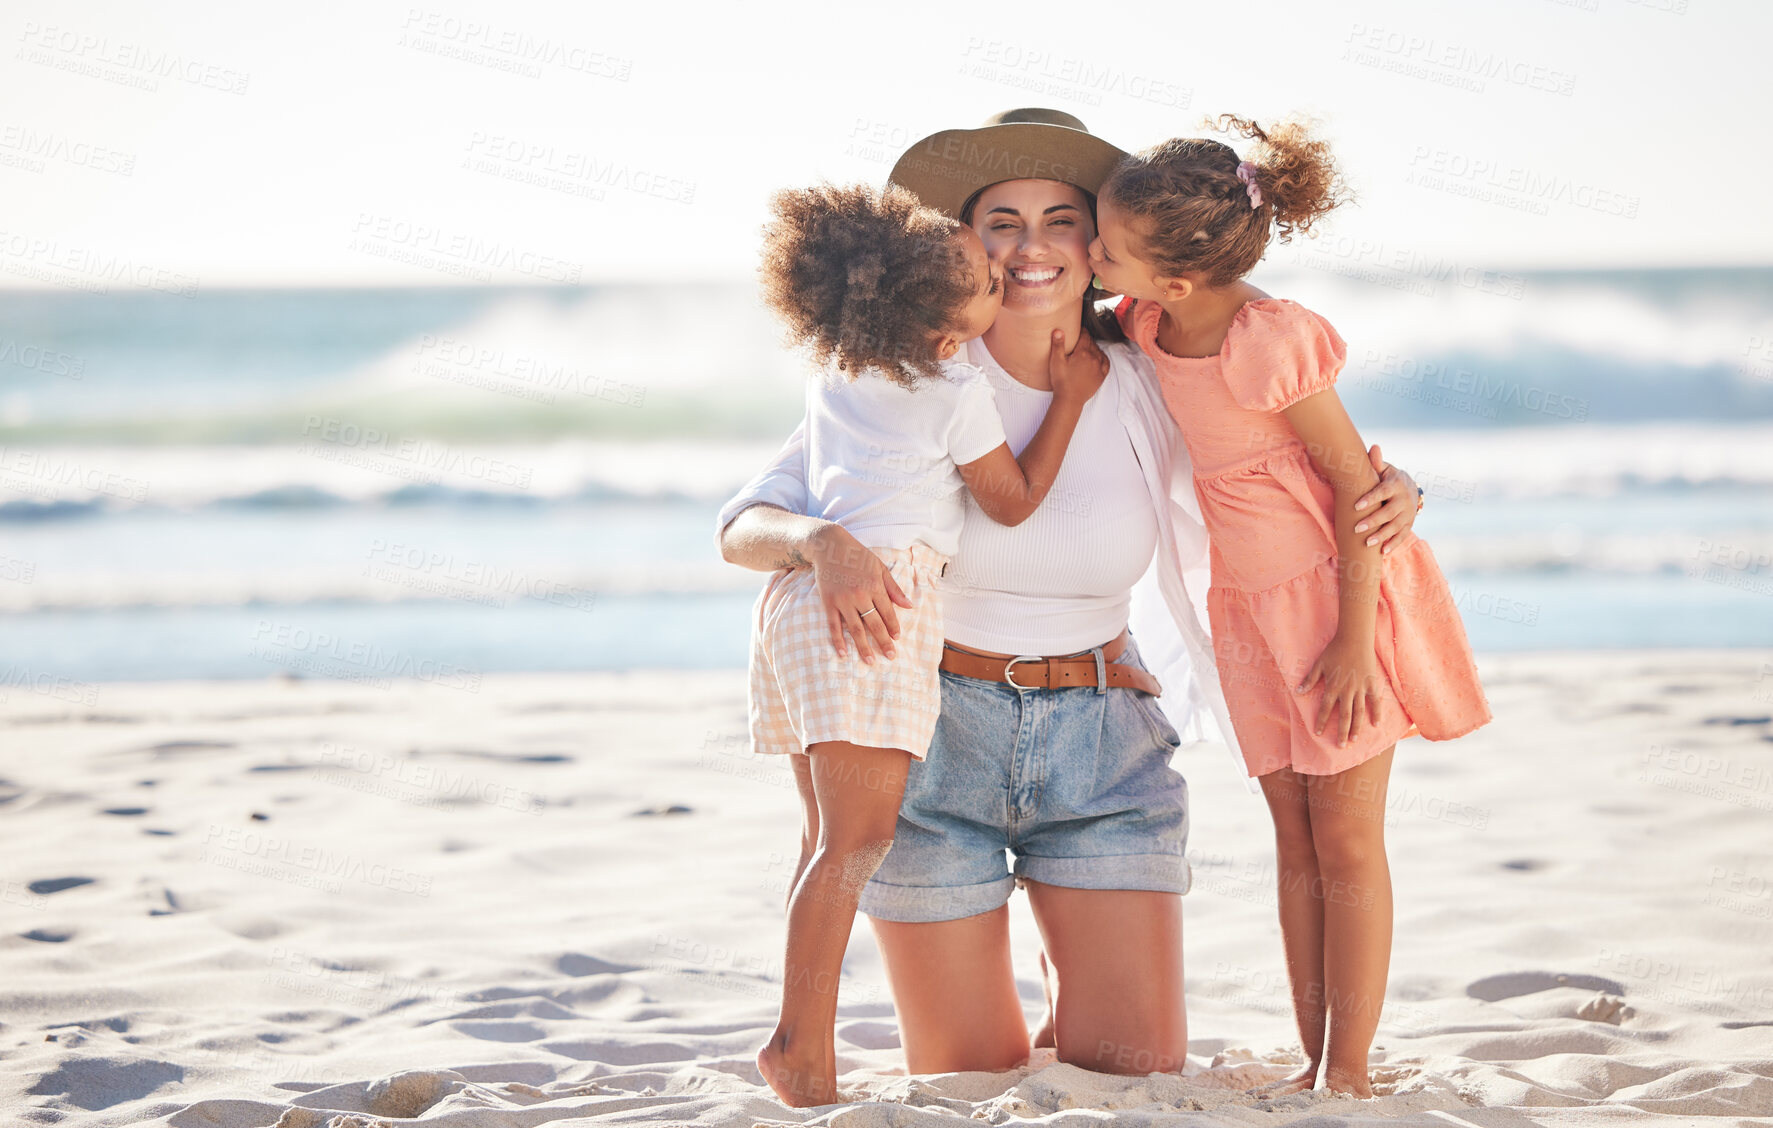 Buy stock photo Mom, kiss or children bonding on beach in Portugal in trust, security or love hug. Smile, happy or support parent with girls, kids or family on relax holiday, mothers day or summer break by ocean sea